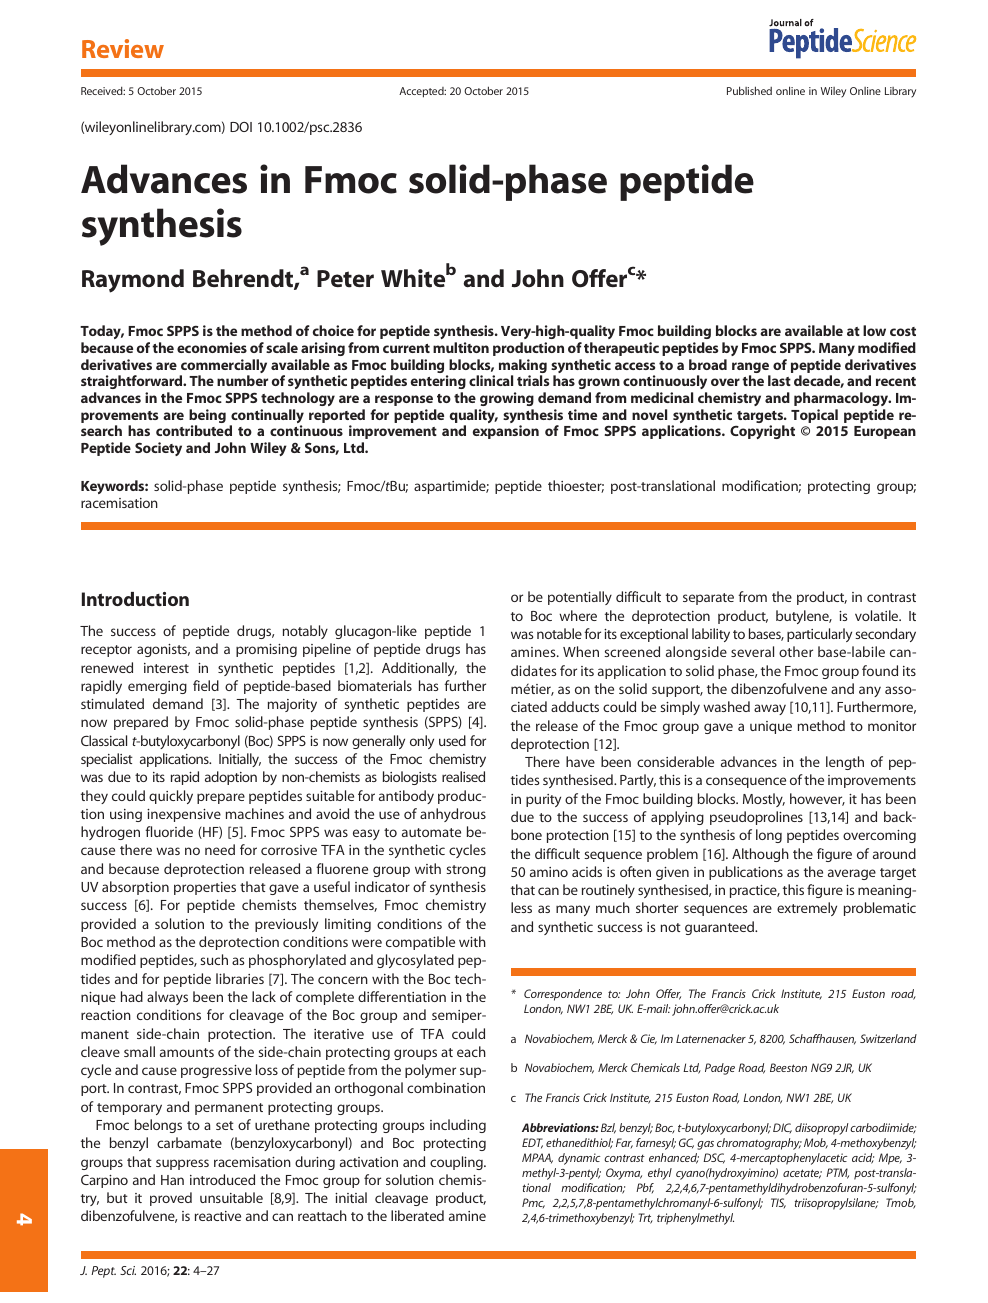 Solid phase peptide synthesis utilizing 9‐fluorenylmethoxycarbonyl amino  acids - FIELDS - 1990 - International Journal of Peptide and Protein  Research - Wiley Online Library